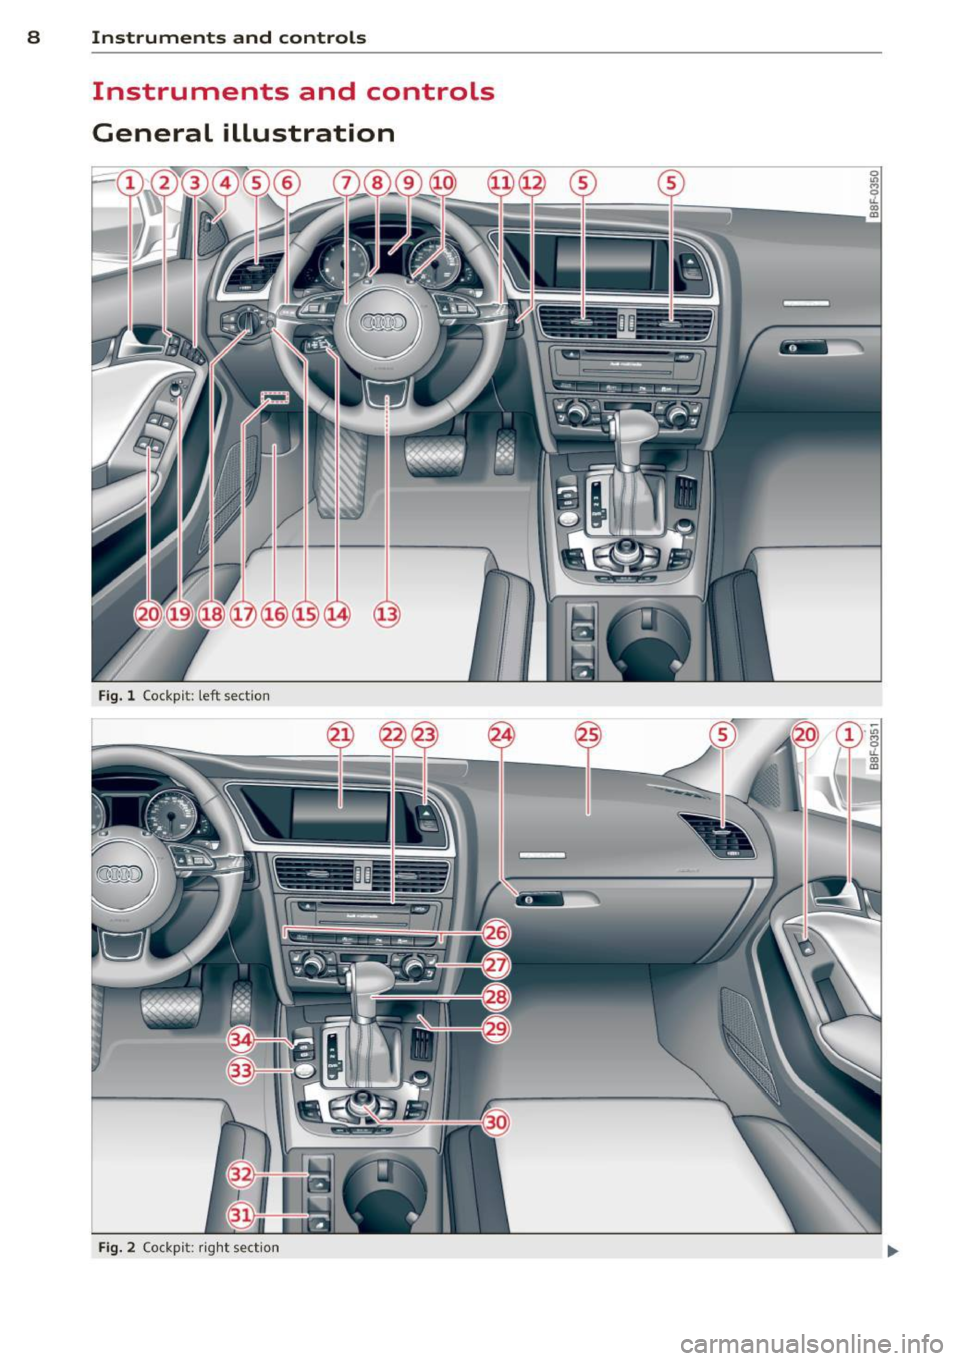 AUDI A5 CABRIOLET 2014  Owners Manual 8  Instruments and controls 
Instruments  and  controls 
General  illustration 
13 
Fig. l Cockp it:  left  sect io n 
Fig. 2 Co ck pi t: ri ght  sect io n 
0 
! CX) m 
I J  